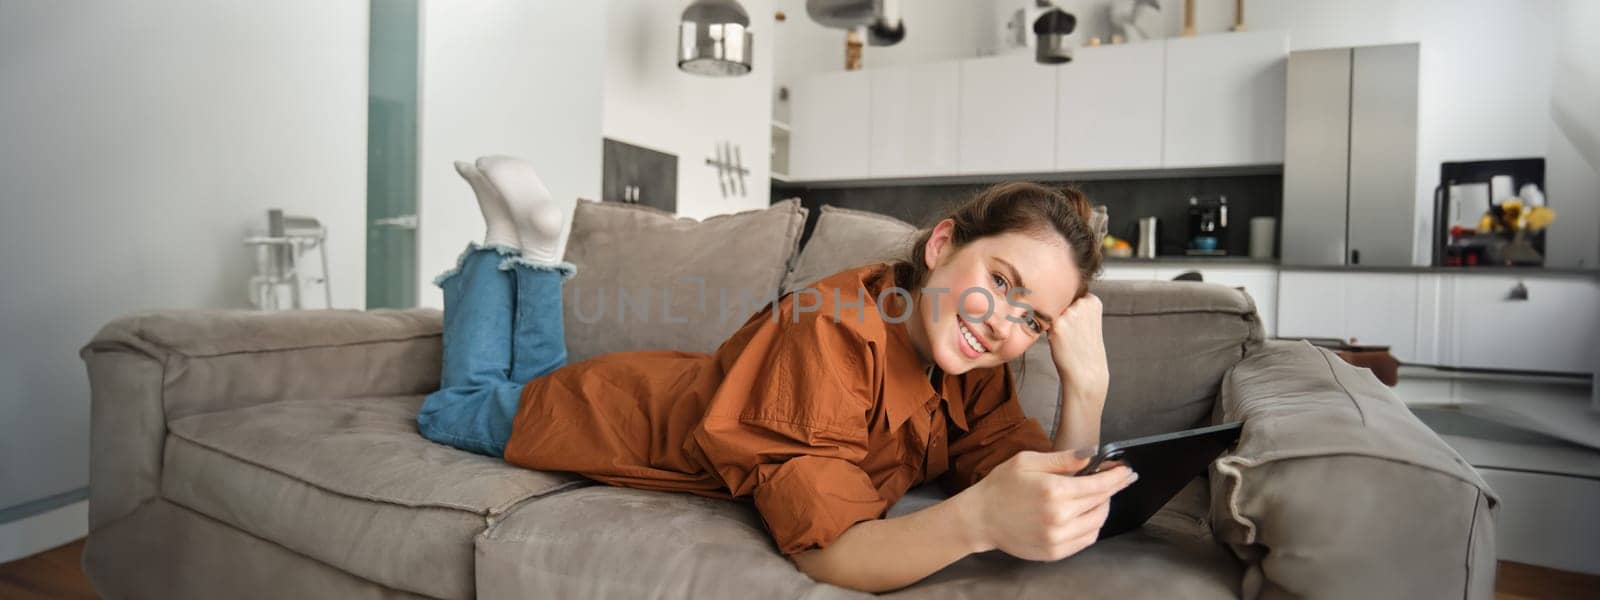 Portrait of smiling, beautiful brunette woman spending time at home, using digital tablet, lying on sofa and looking happy.